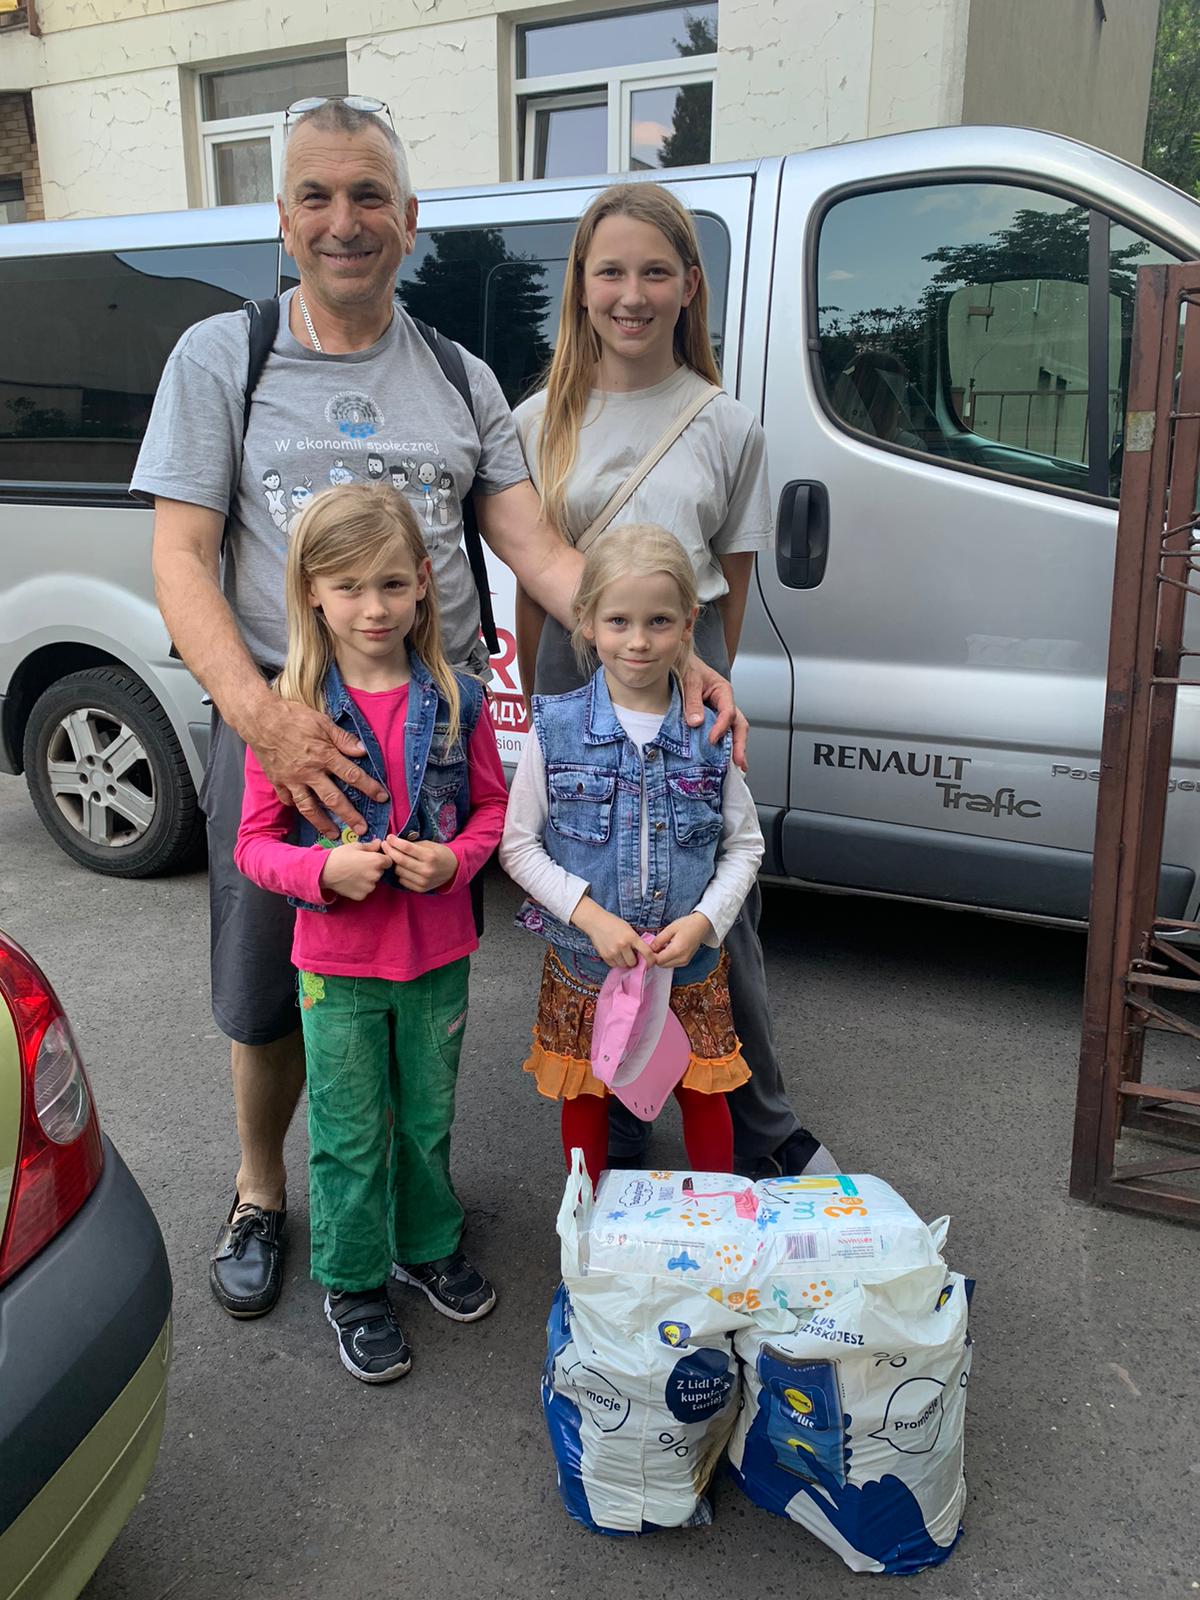 Turlac Mission has spent the past year and a half ministering to Ukrainian refugees, meeting tangible needs and sharing the gospel with them.